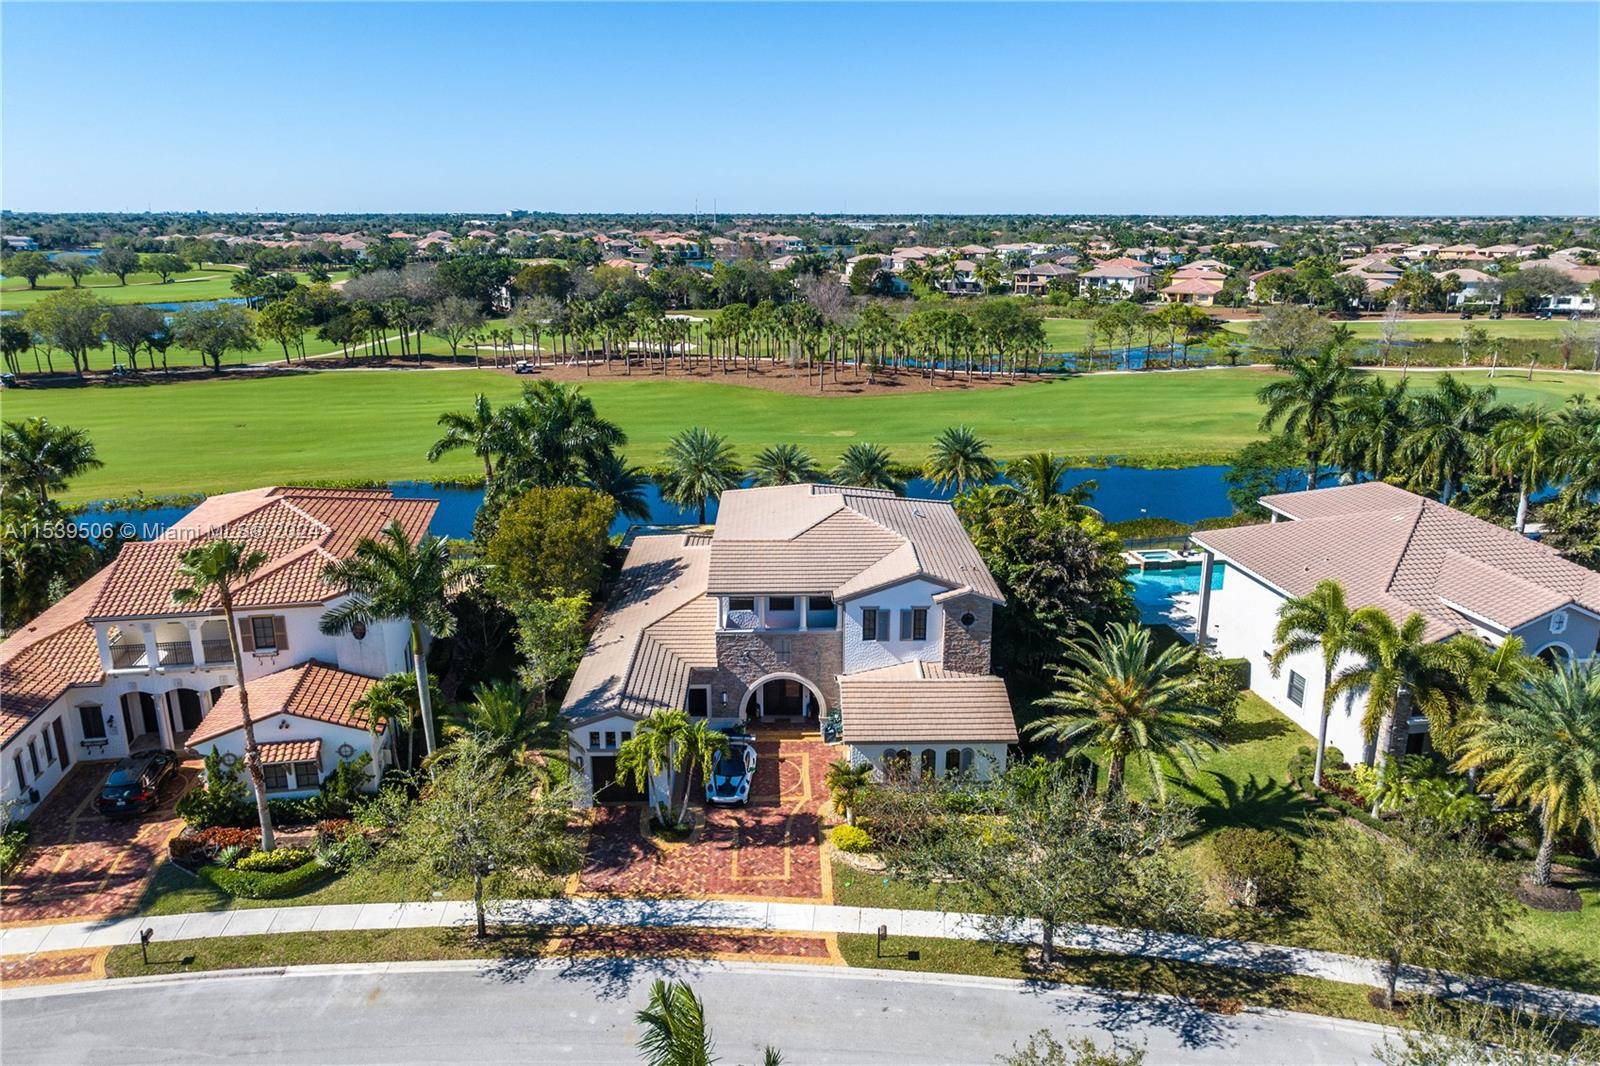 Unique estate property in Parkland Golf CC including 6 bedrooms, 4 full and 2 half bathrooms, and a sizable lot with views of the lake and fairway.